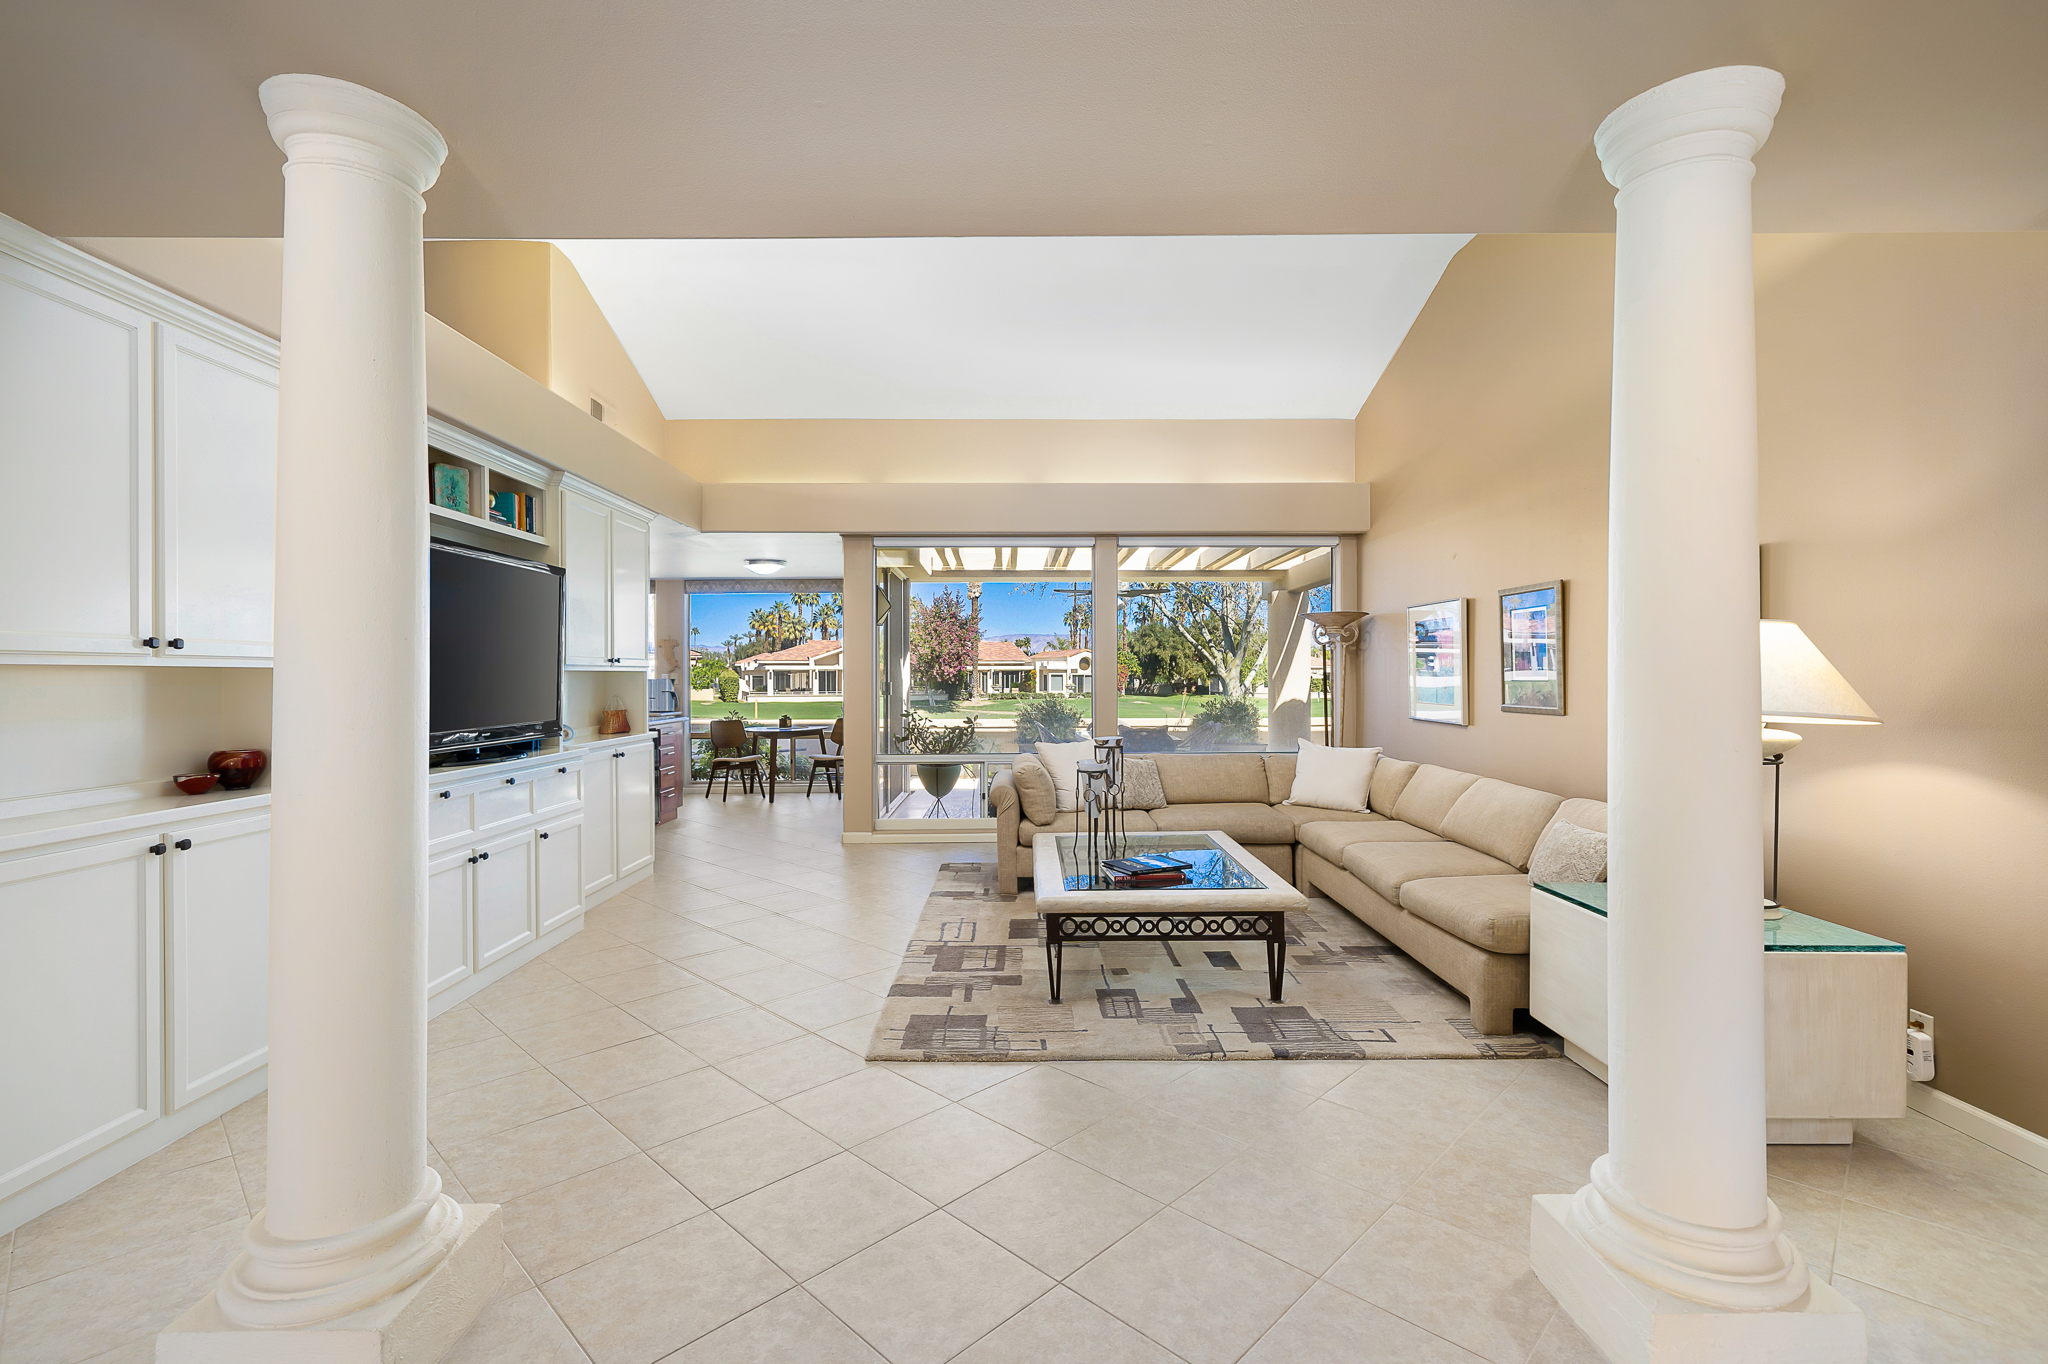 75436 Augusta Dr, Indian Wells, CA 92210, USA Photo 24